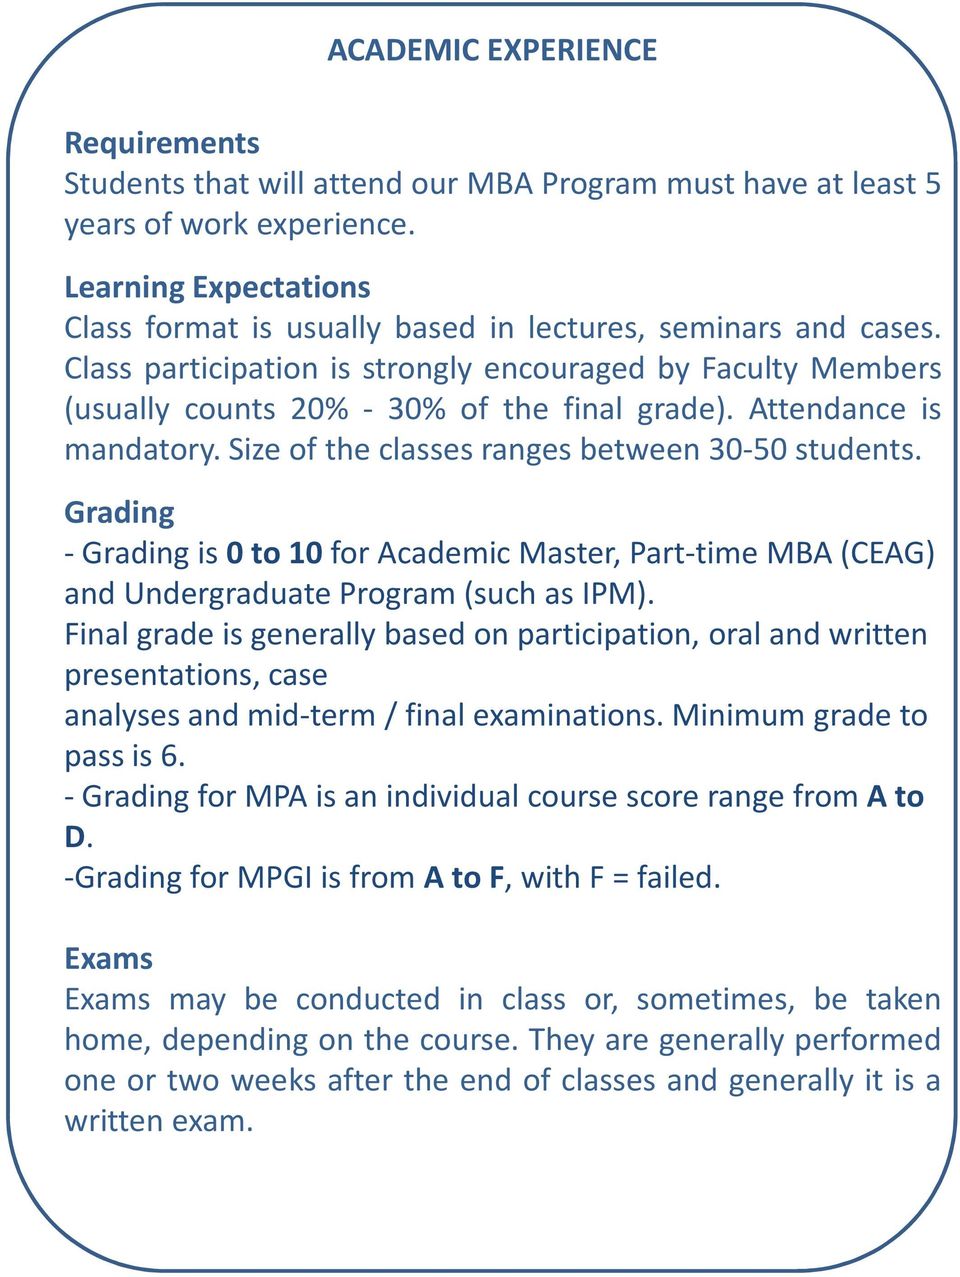 Grading -Grading is 0 to 10 for Academic Master, Part-time MBA (CEAG) and Undergraduate Program (such as IPM).